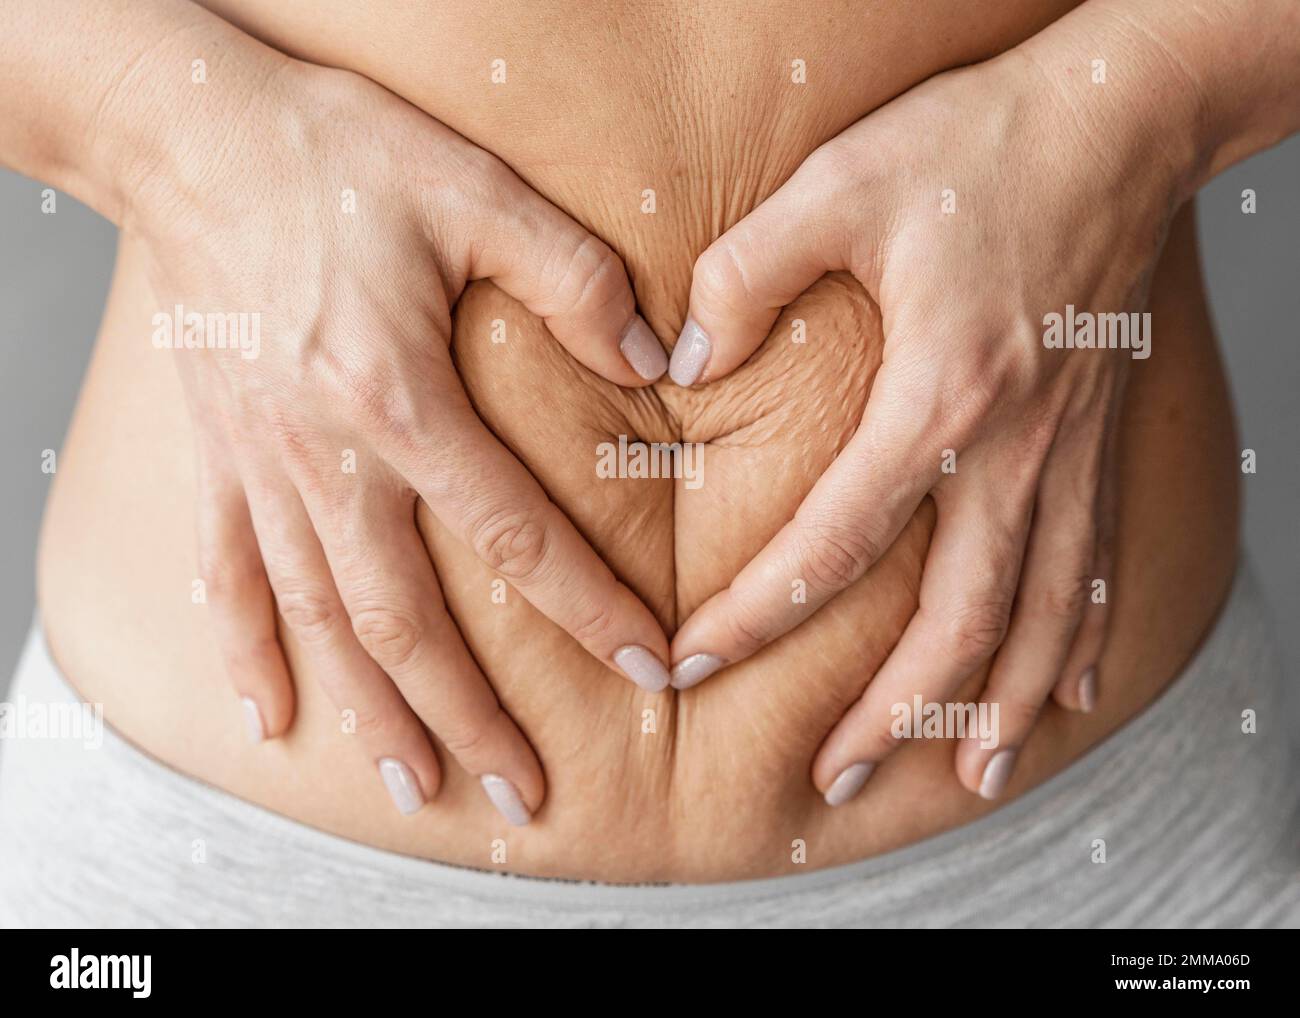 close up hands holding belly. Beautiful photo Stock Photo